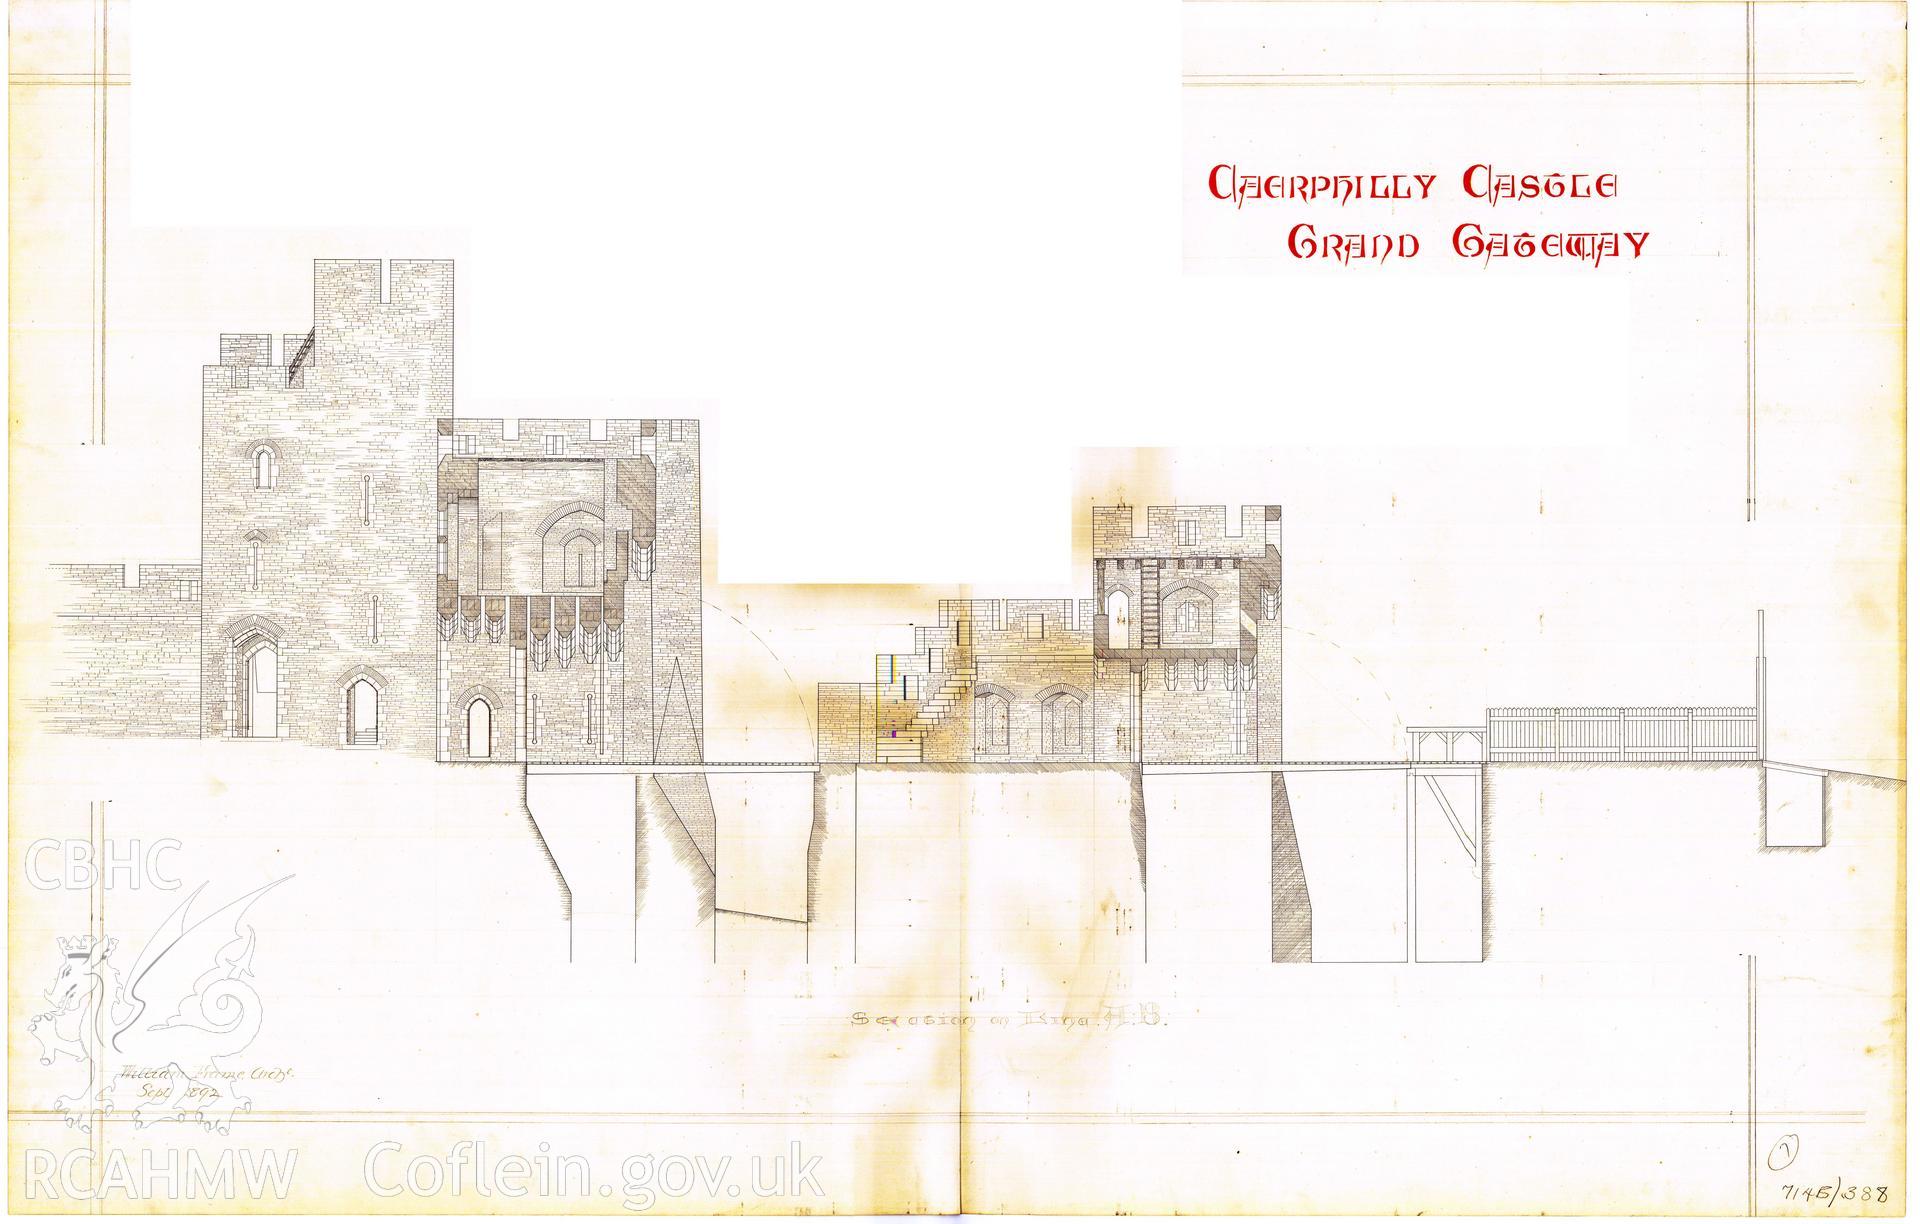 Cadw guardianship monument drawing of Caerphilly Castle. Grand Gateway. Cadw Ref. No:714B/388. Scale 1:96.